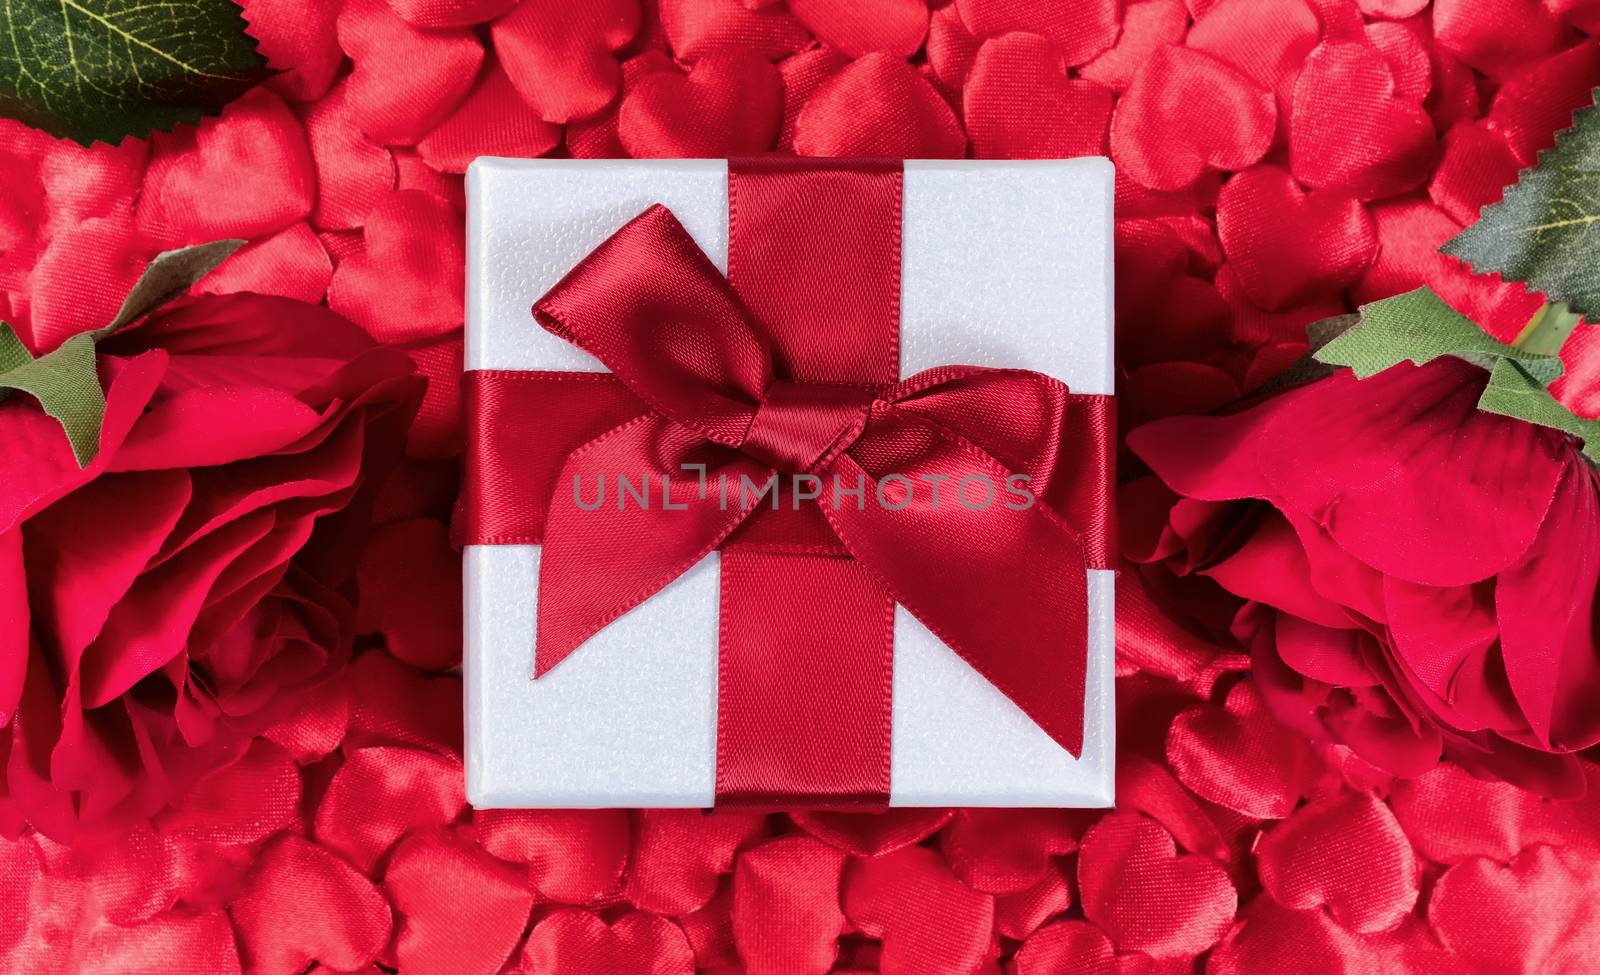 Valentine Gift box with hearts and roses in background 